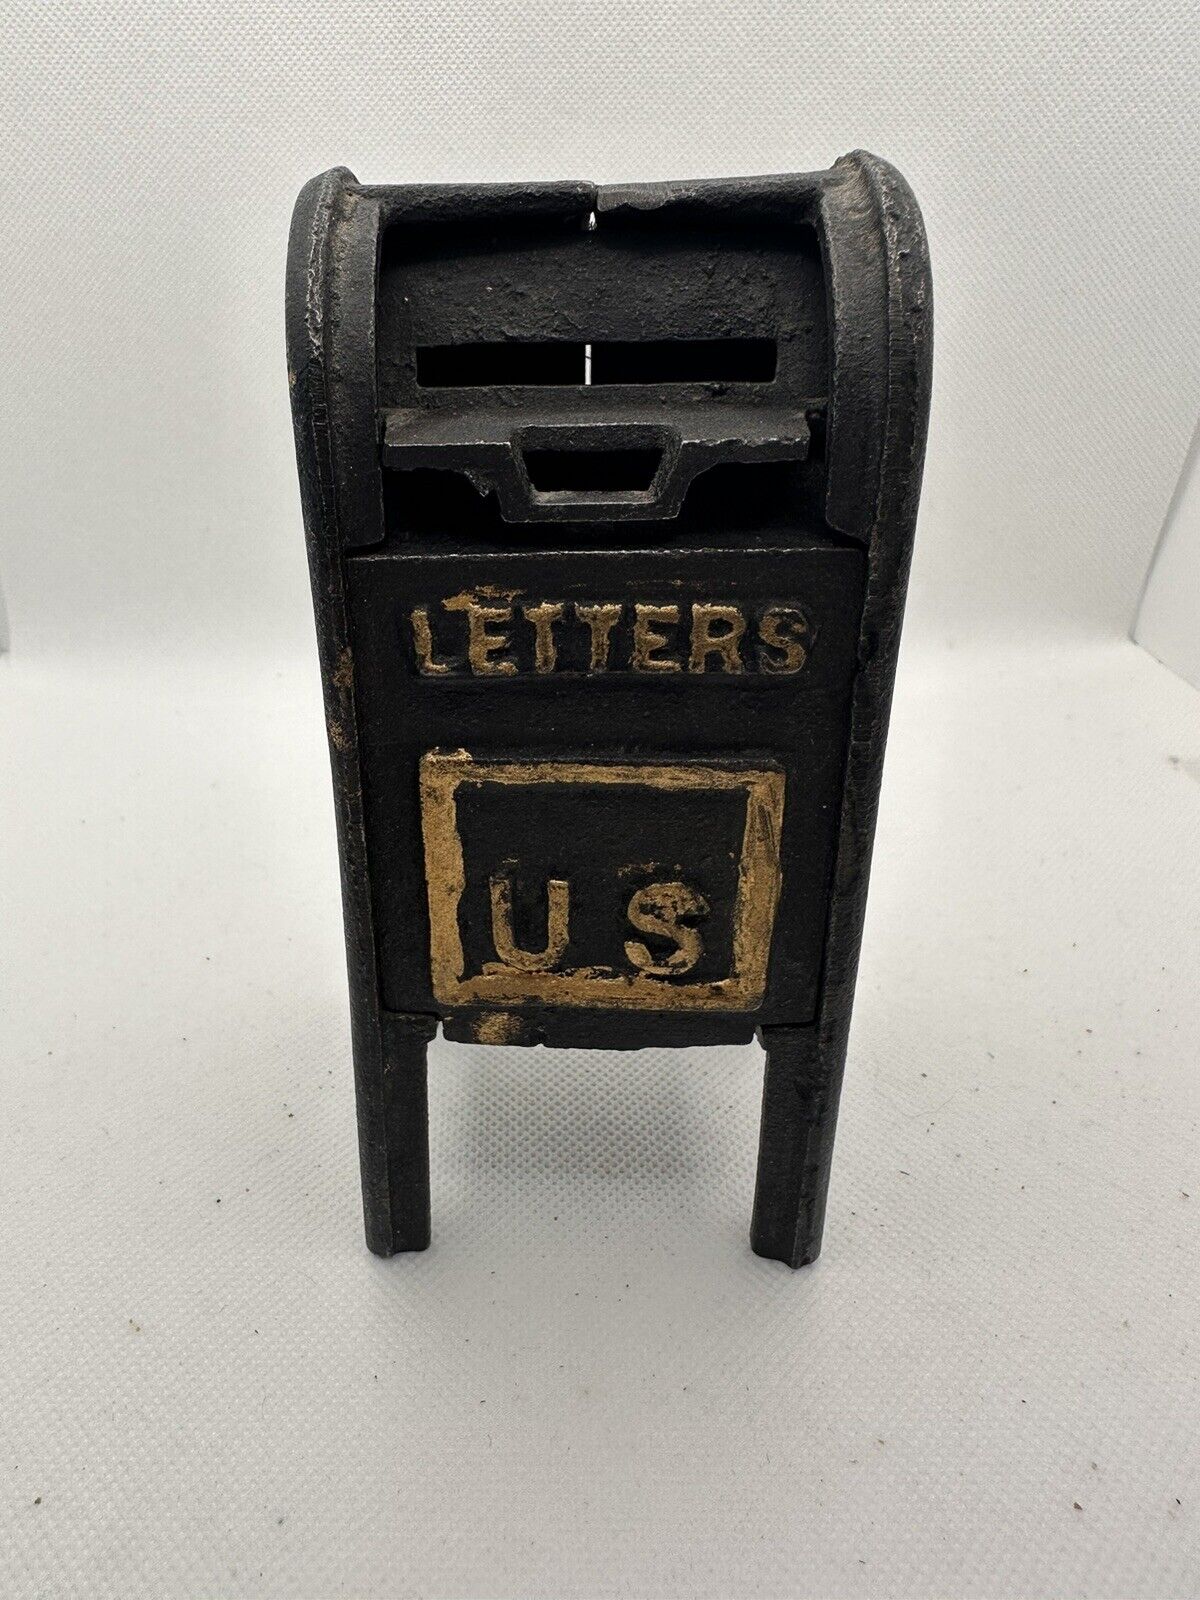 VINTAGE CAST IRON MAIL BOX AIR MAIL LETTERS US MAIL BOX BANK , OPENING FLAP